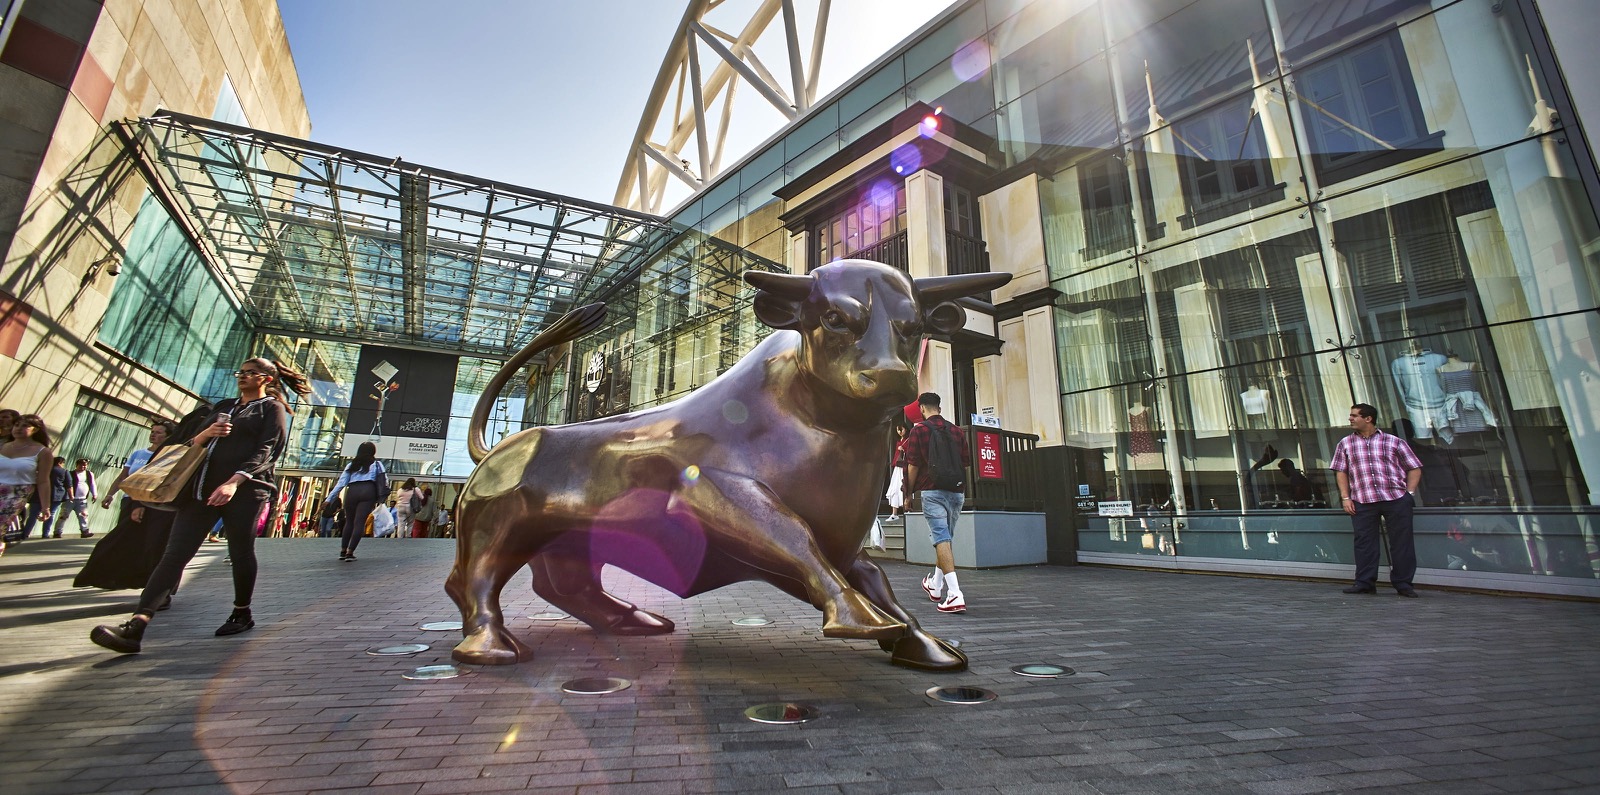 The statue of the bull outside the Bullring shopping centre in Birmingham.